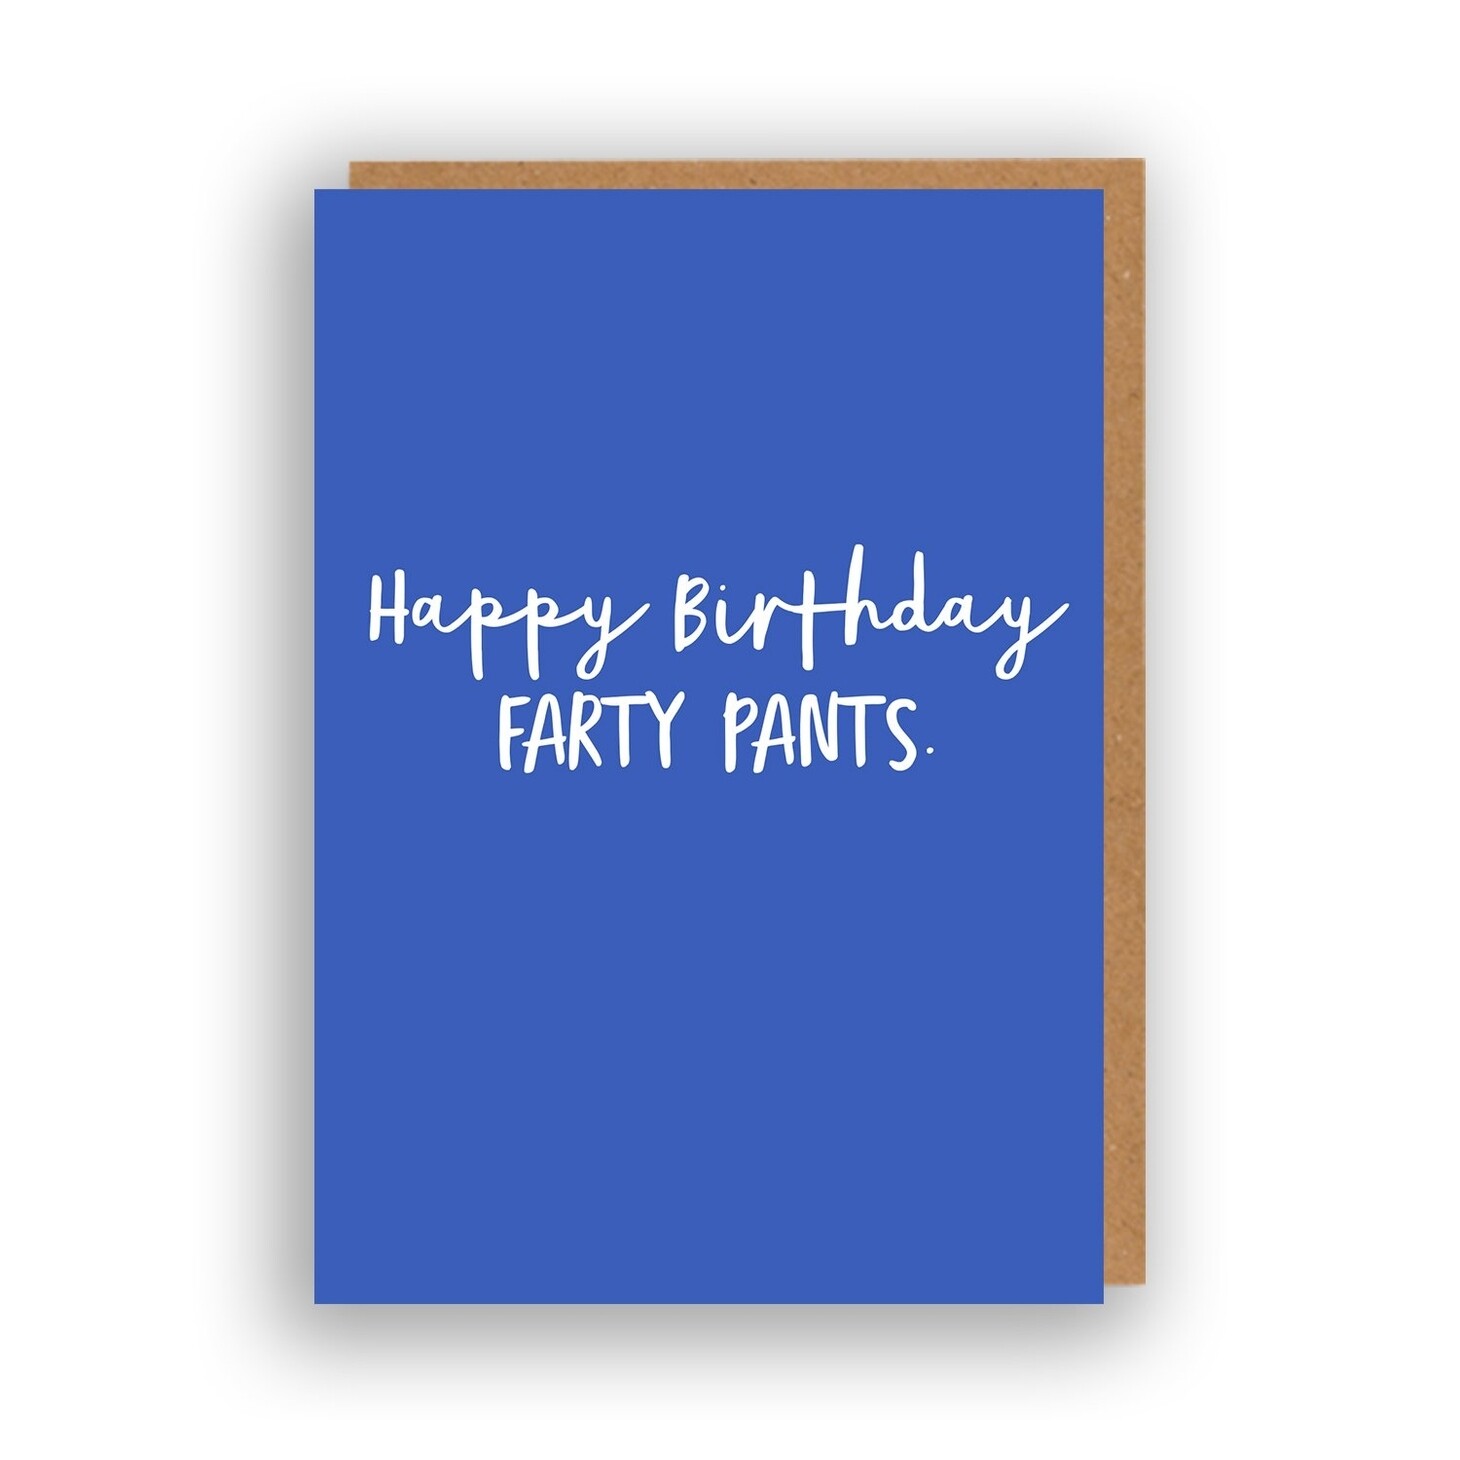 Farty Pants Card